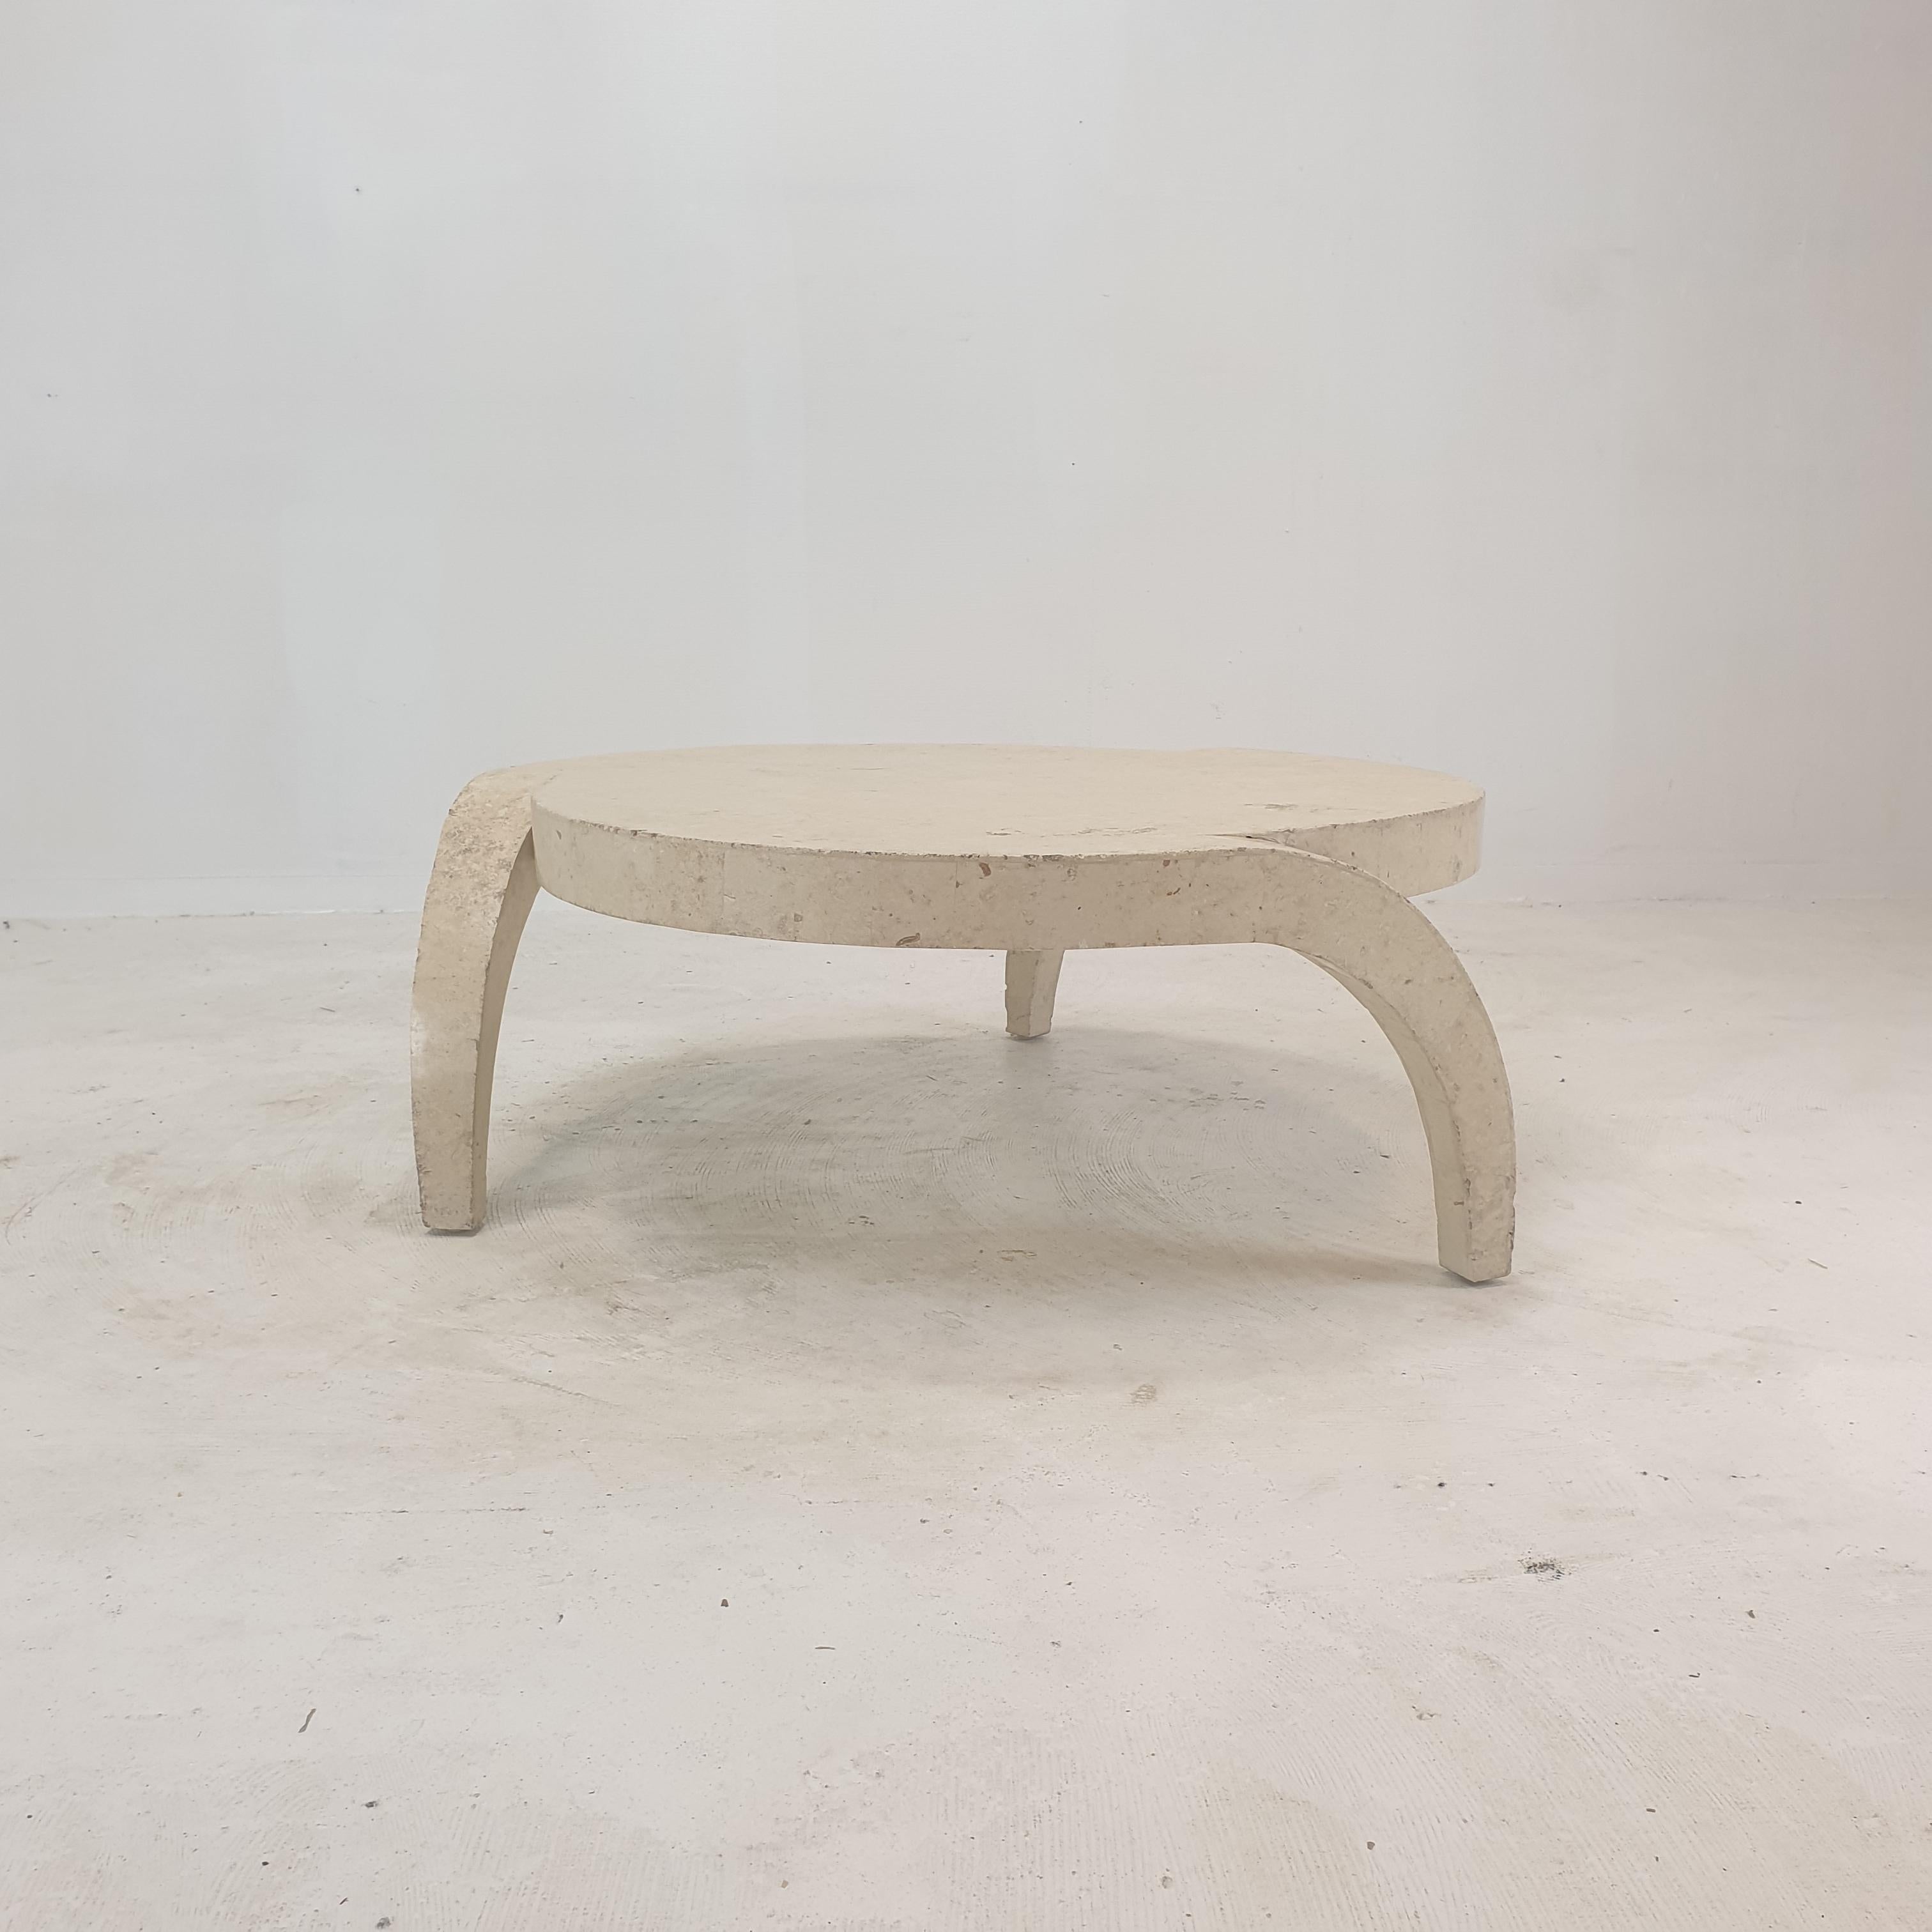 Post-Modern Mactan Stone or Fossil Stone Coffee Table, 1980s For Sale